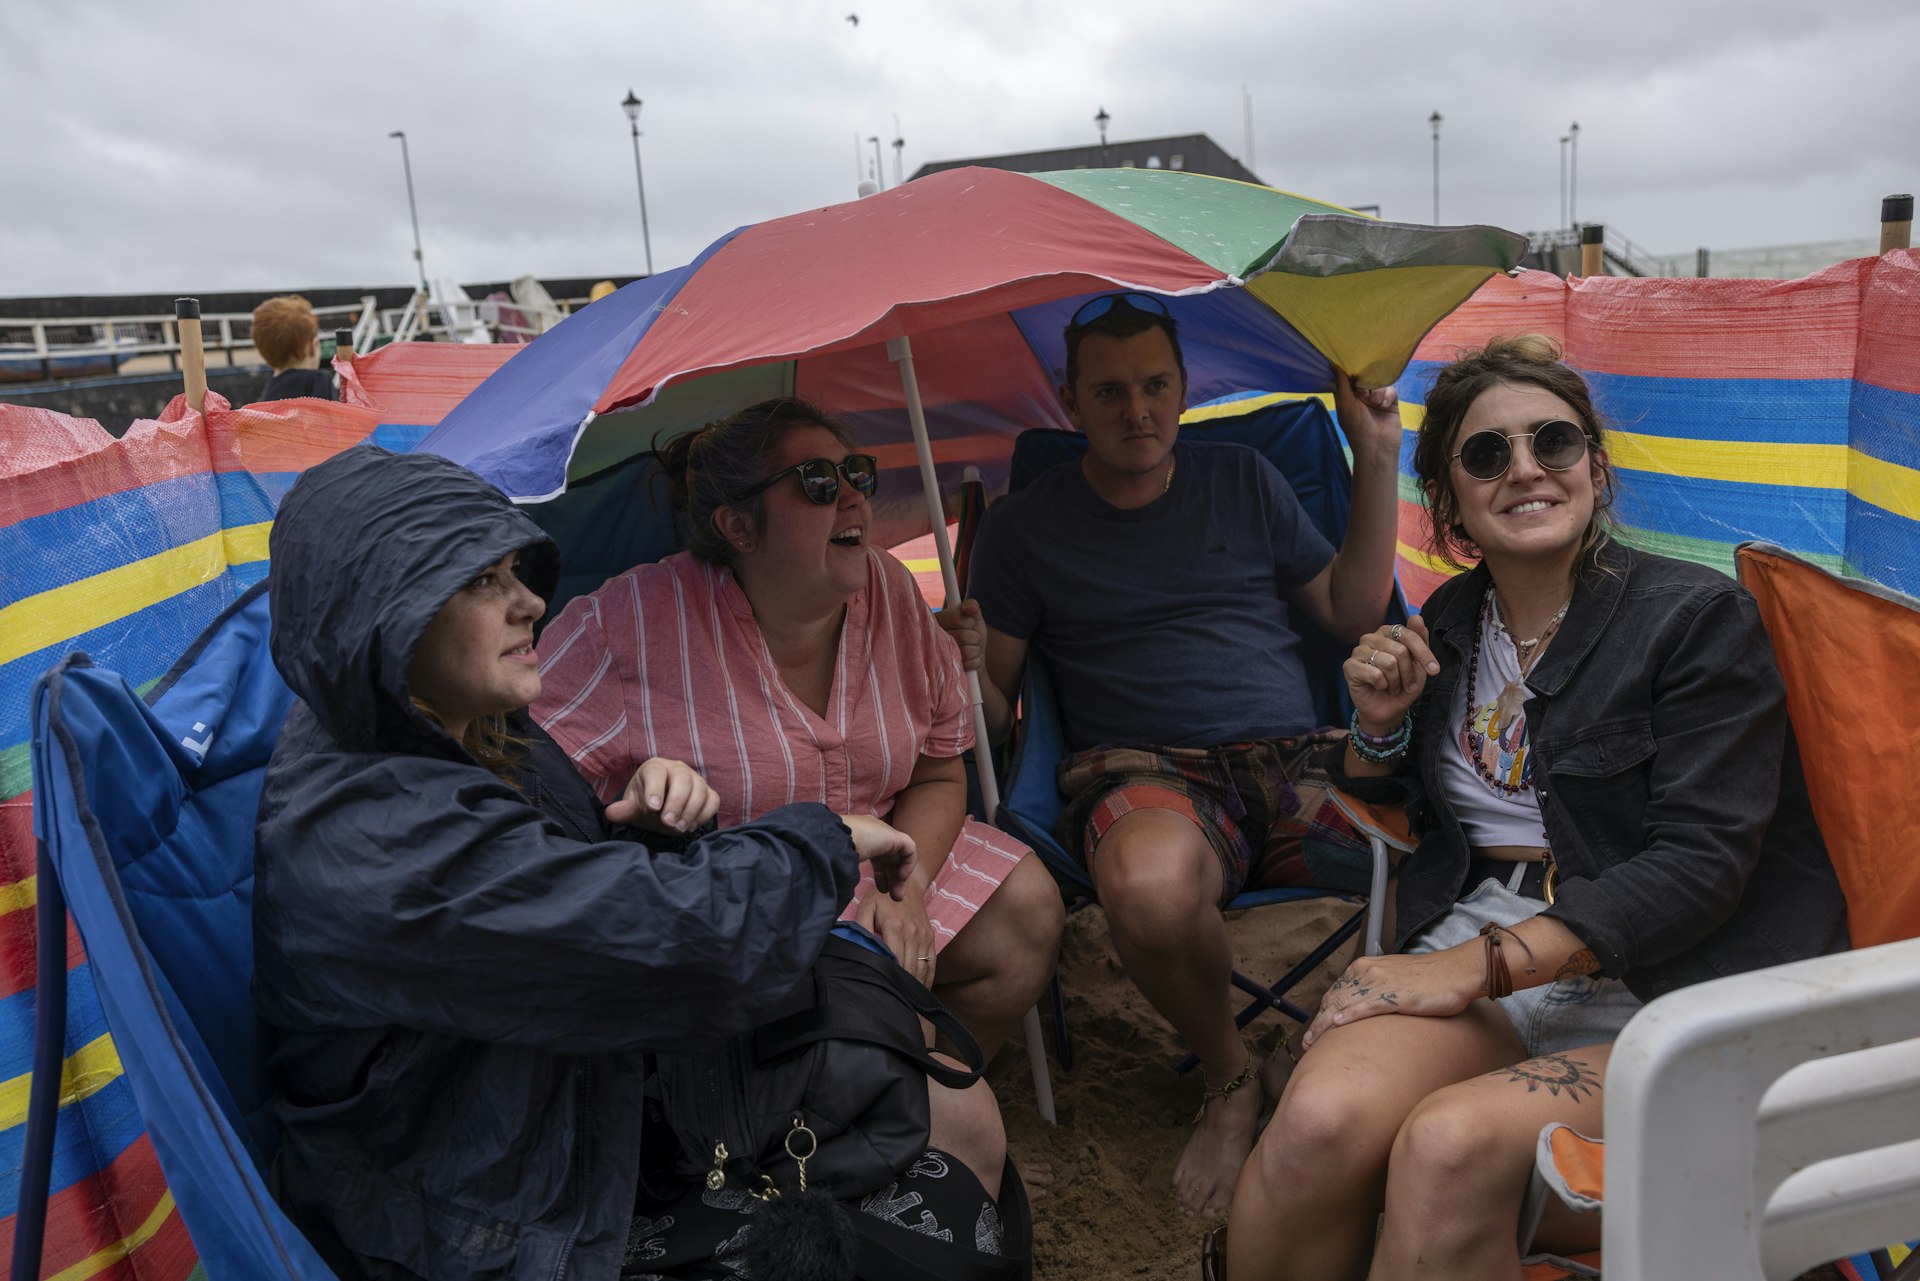 Friends shelter from the rain outside their beach hut in Broadstairs, England, United Kingdom,s